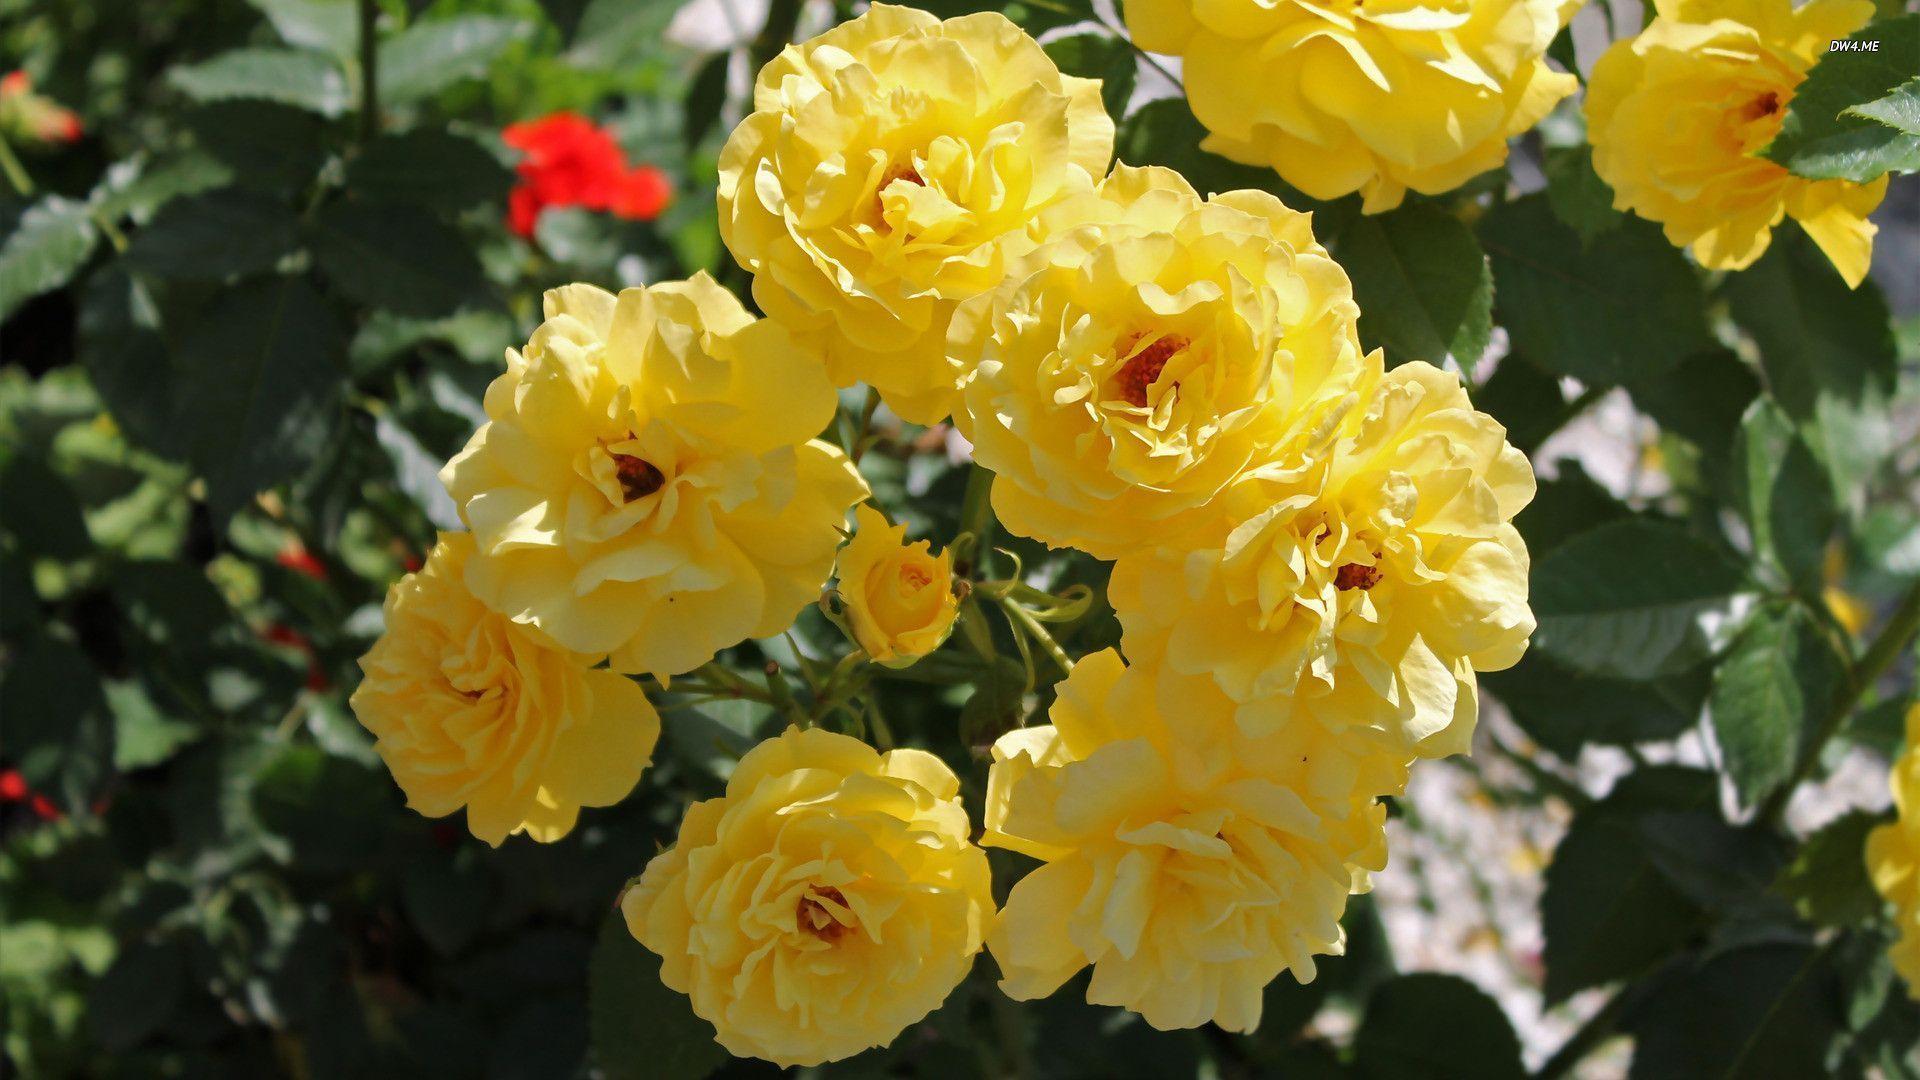 Yellow Rose Flowers Wallpapers Hd 1080p 12 Hd Wallpapers - Beautiful Flowers Images Hd 1080p - HD Wallpaper 